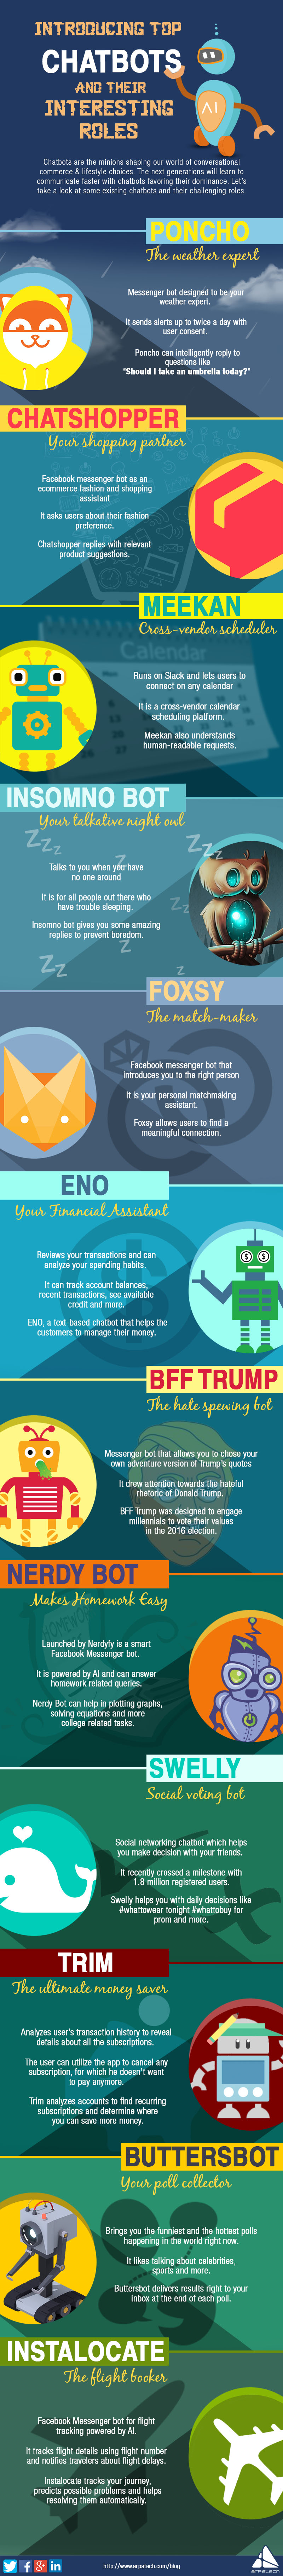 Introducing Top Chatbots & Their Interesting Roles